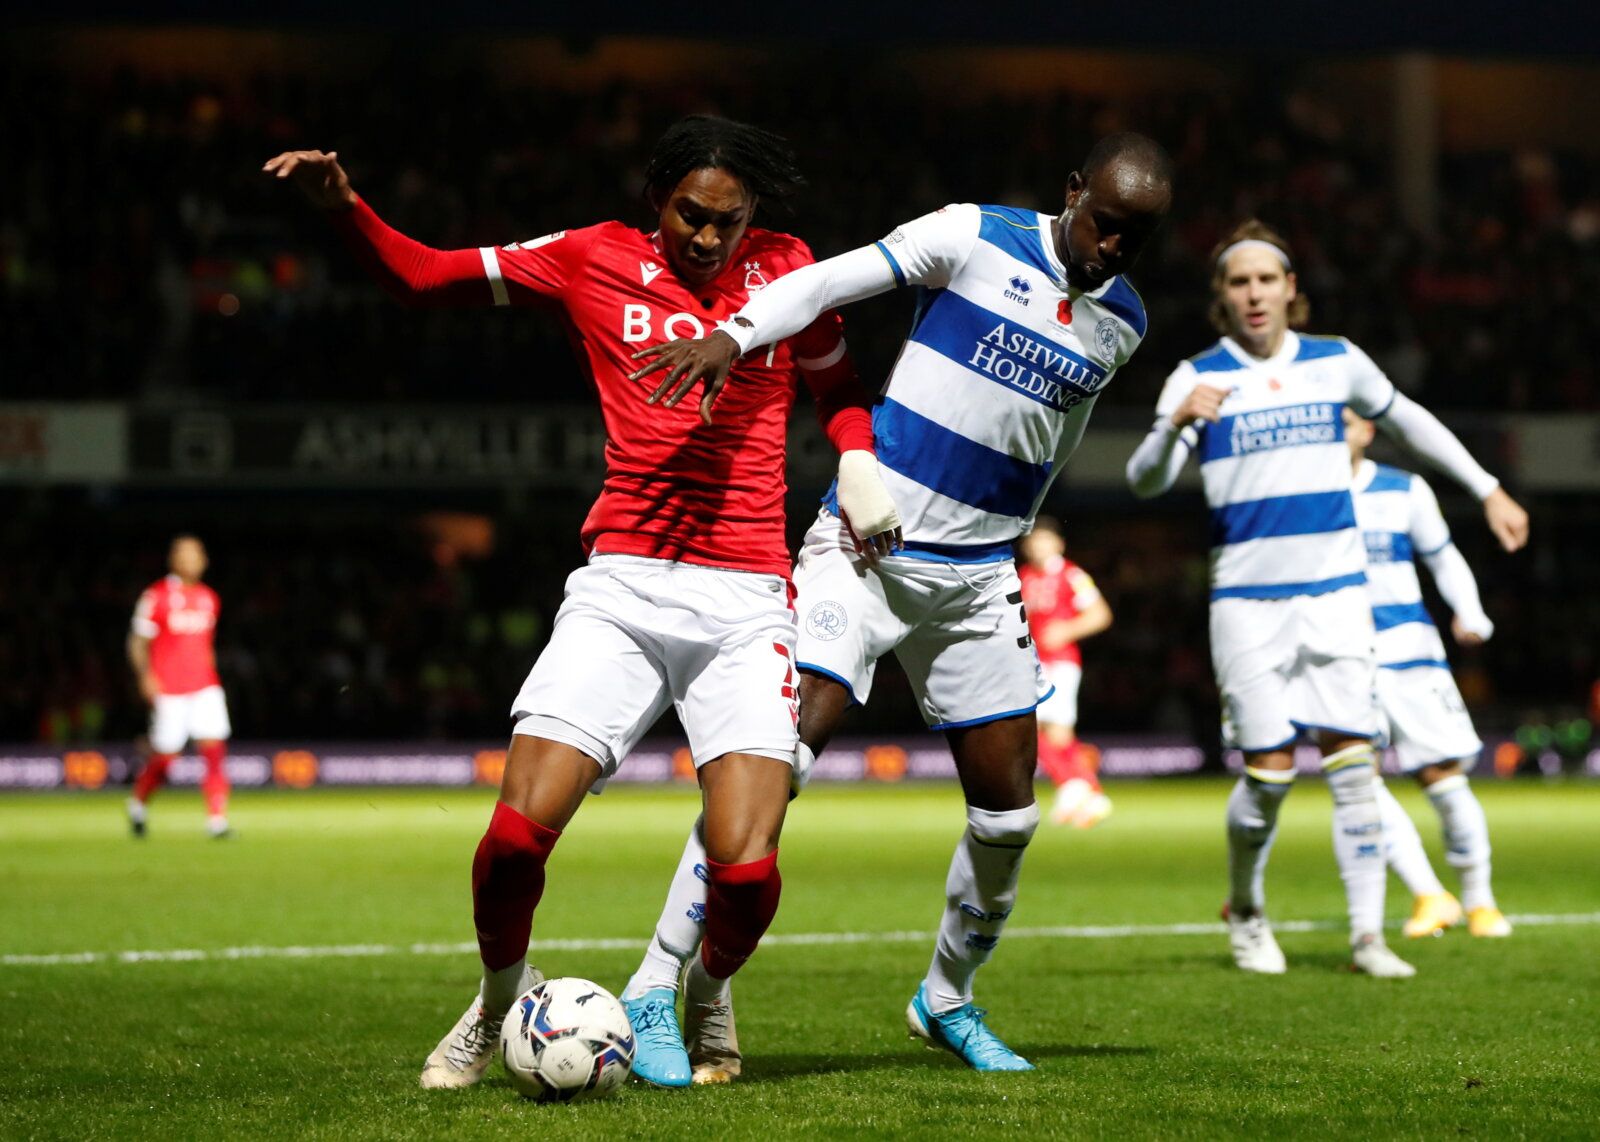 Soccer Football - Championship - Queens Park Rangers v Nottingham Forest - Loftus Road, London, Britain - October 29, 2021  Queens Park Rangers' Albert Adomah in action with Nottingham Forest's Djed Spence   Action Images/Paul Childs  EDITORIAL USE ONLY. No use with unauthorized audio, video, data, fixture lists, club/league logos or 